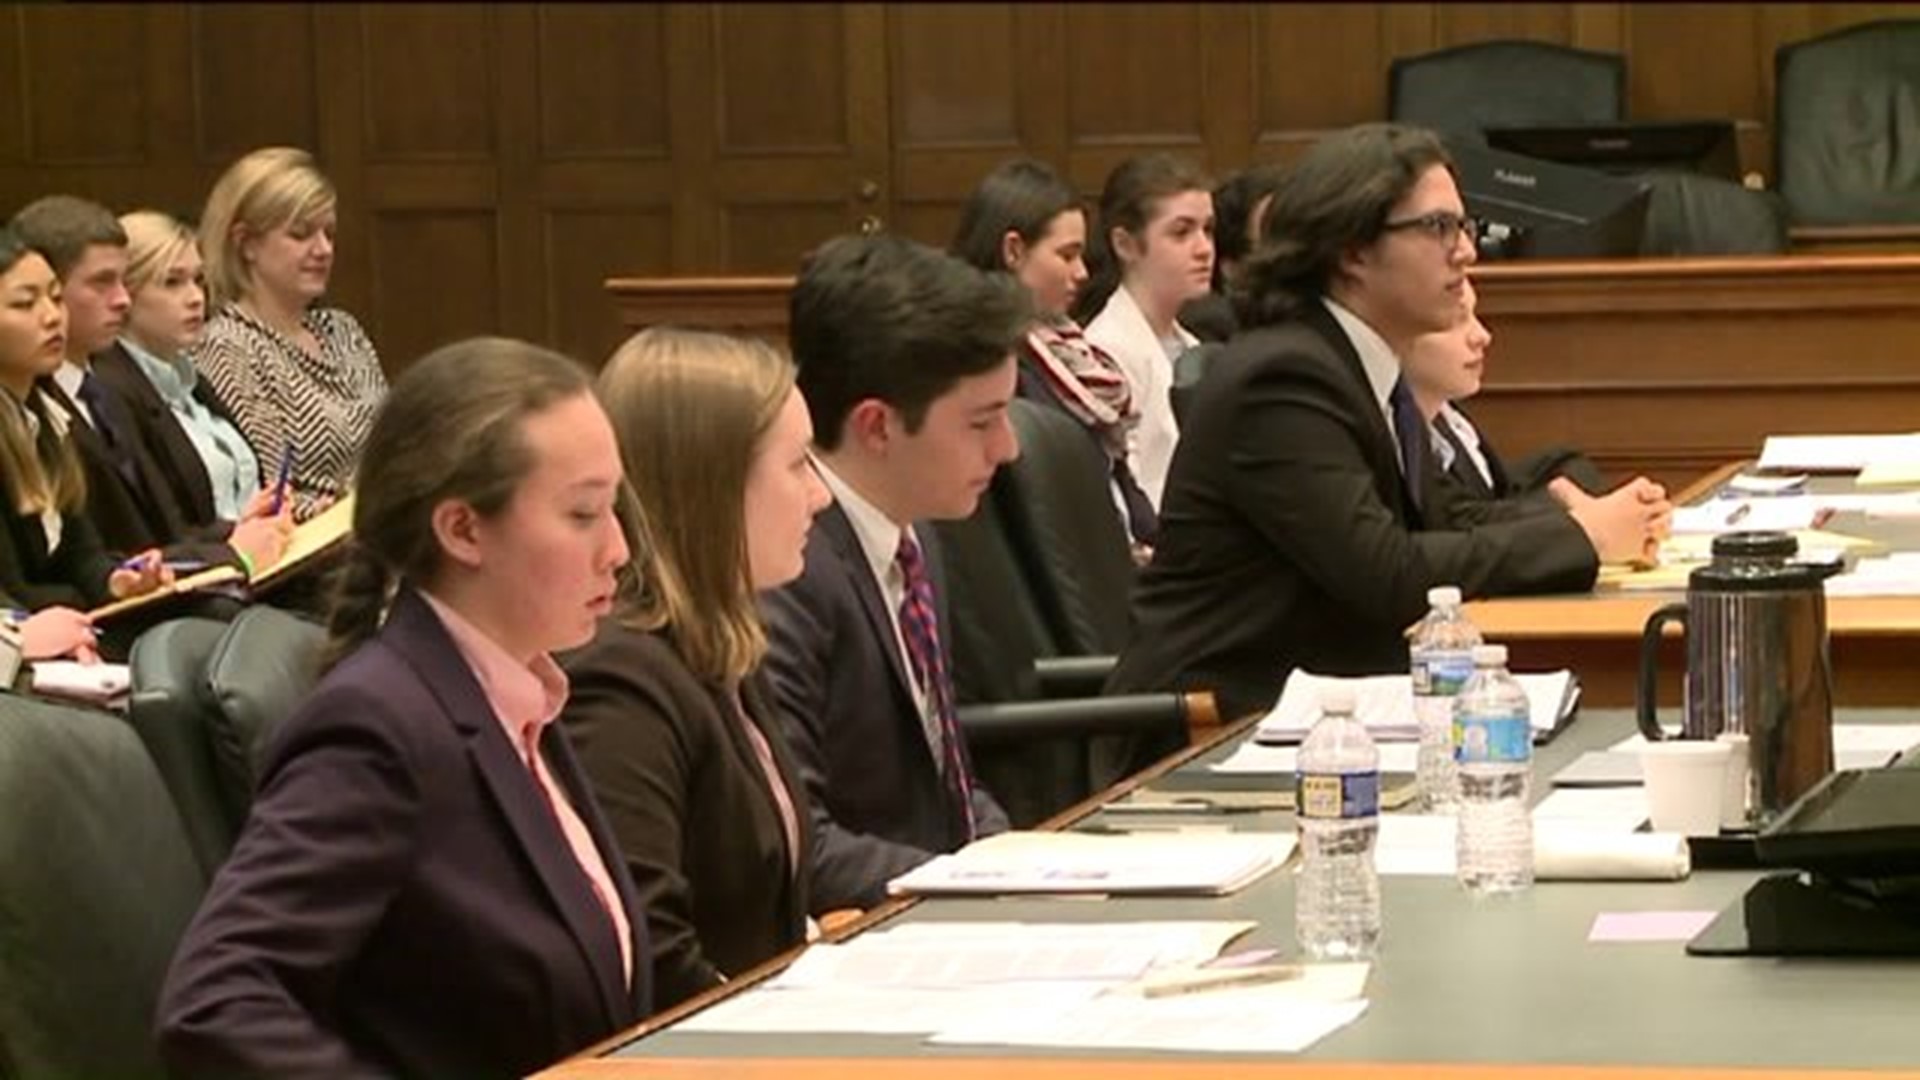 Students Compete in Mock Trial Competition at Federal Courthouse